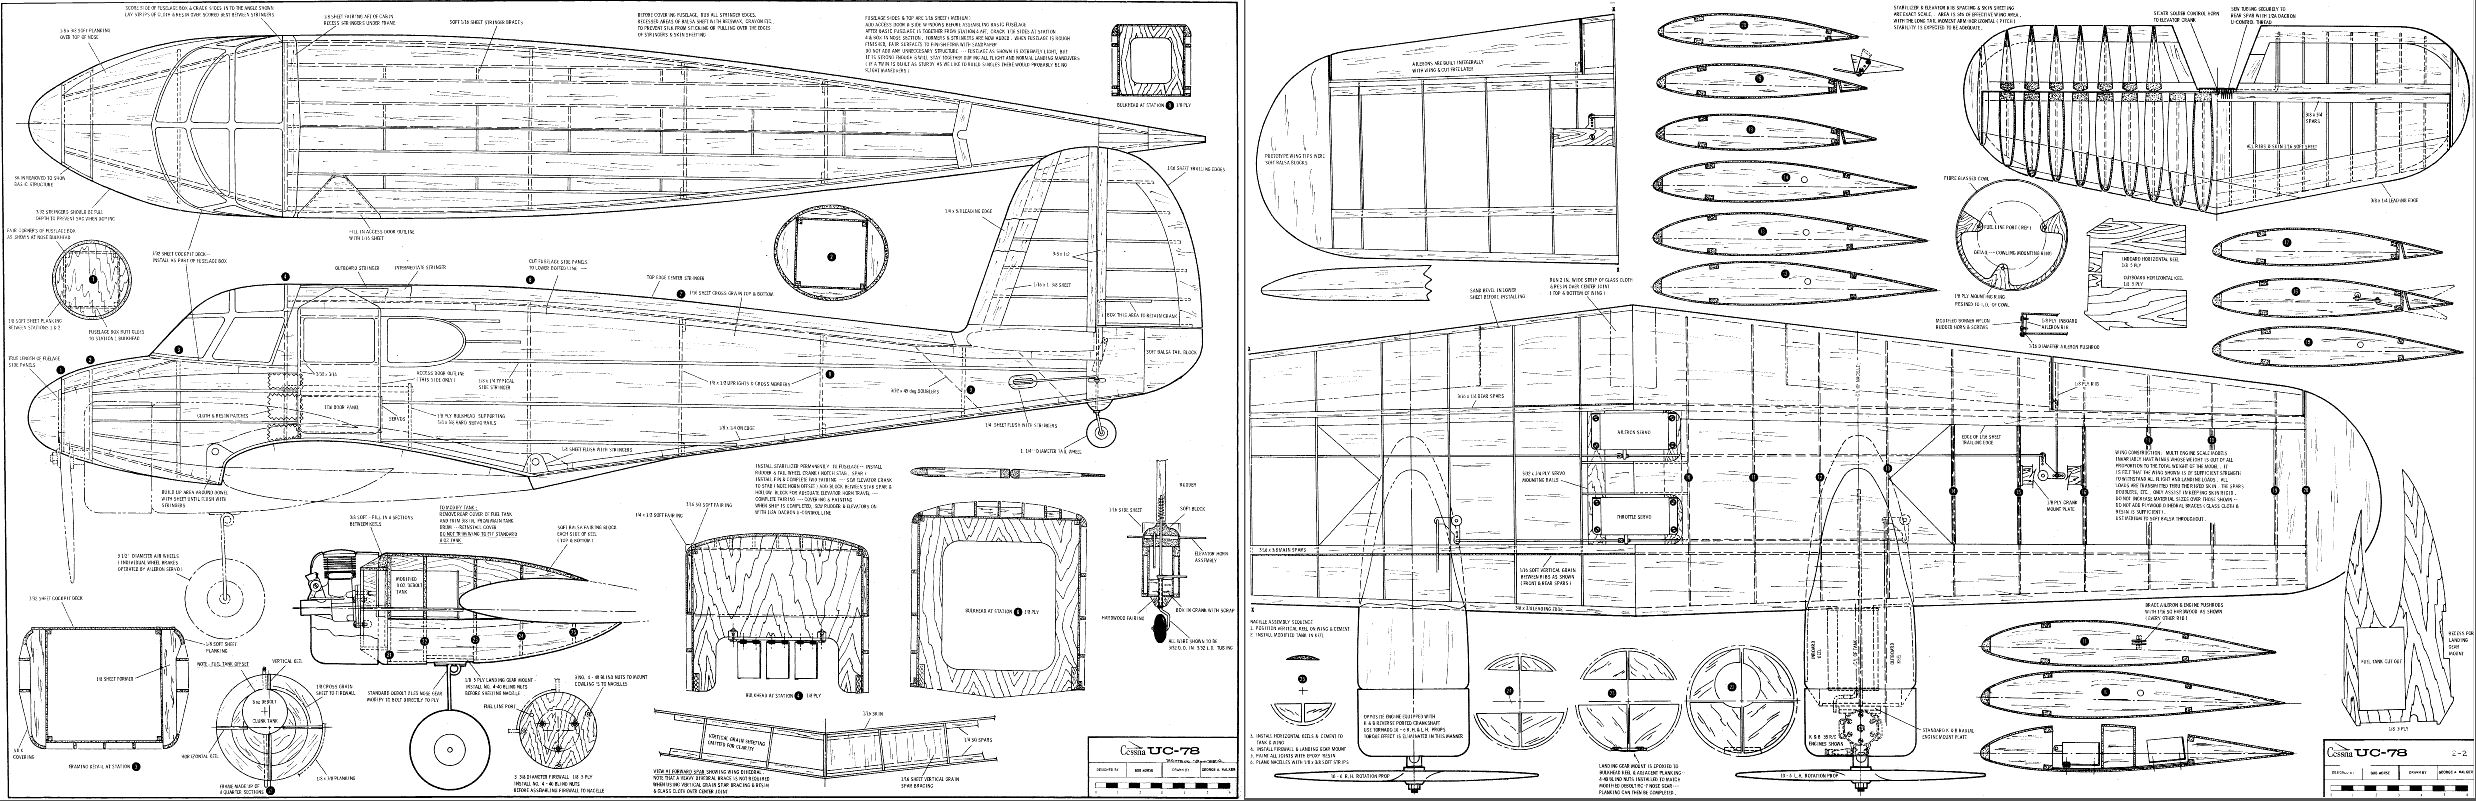 Trainer model airplane plans